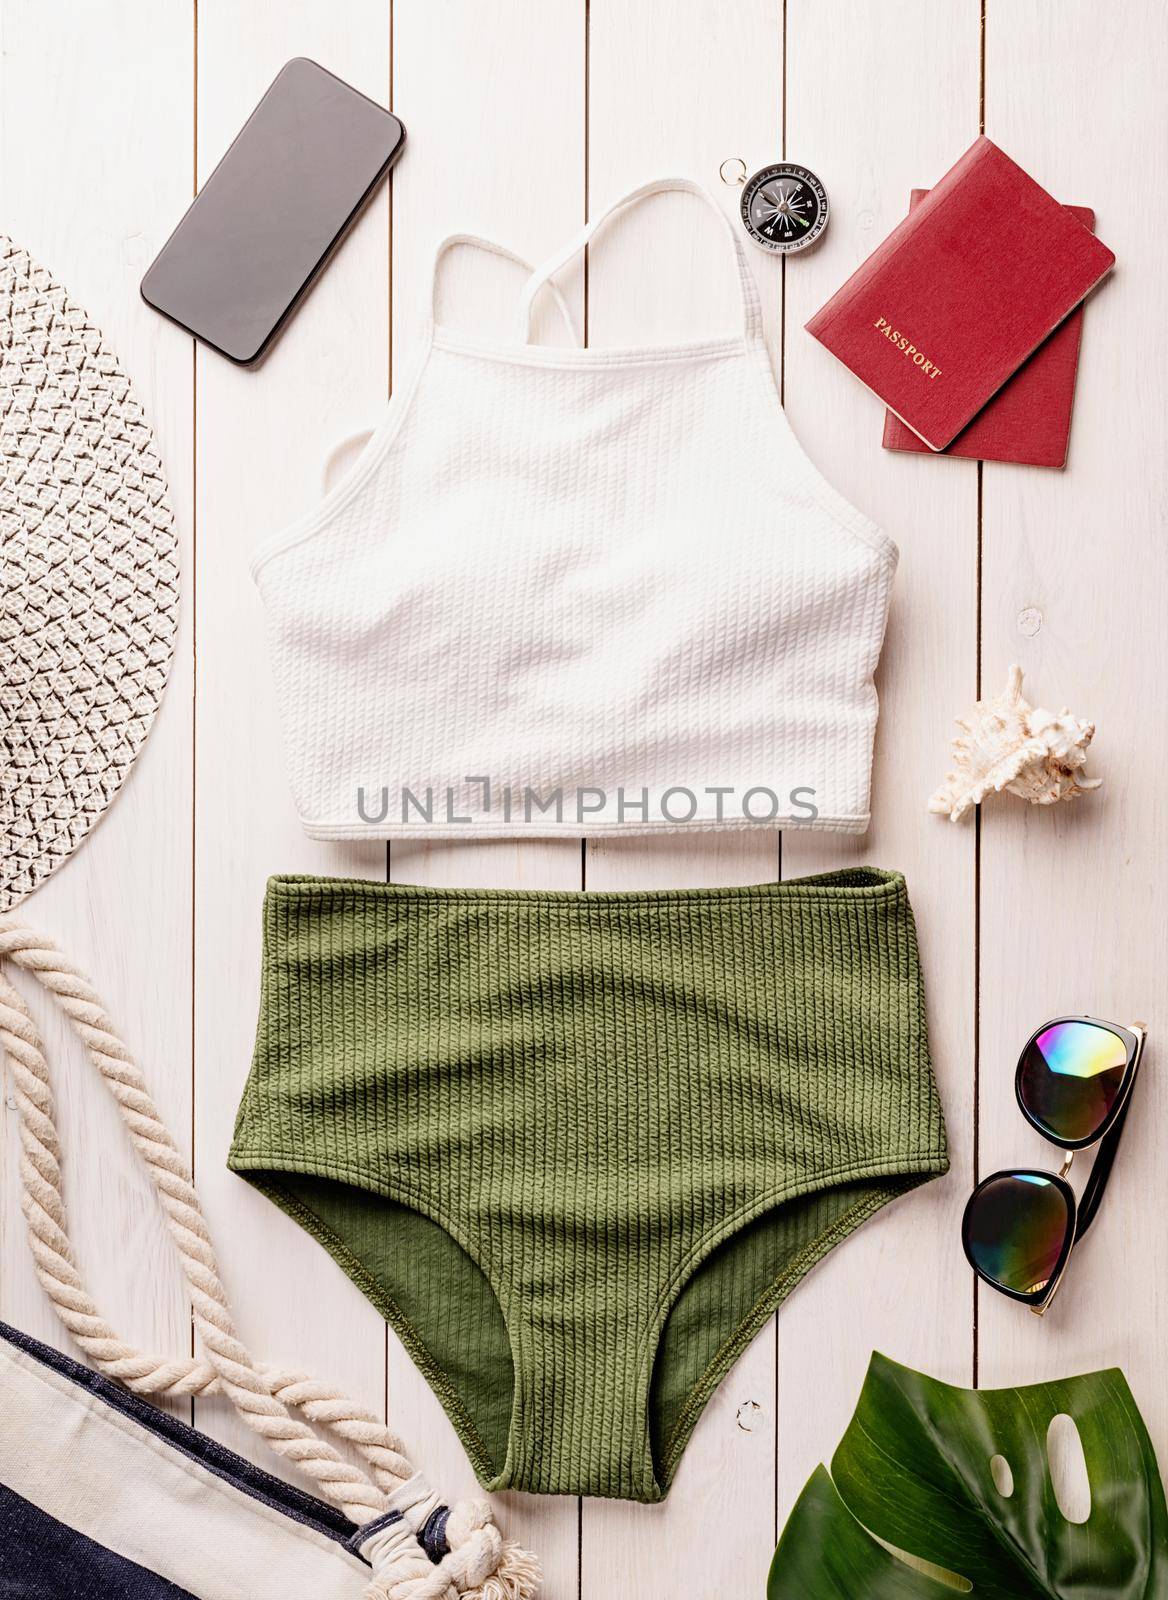 Flat lay travelling objects with swimsuit, smartphone, passports, sunglasses and compass on white wooden background by Desperada